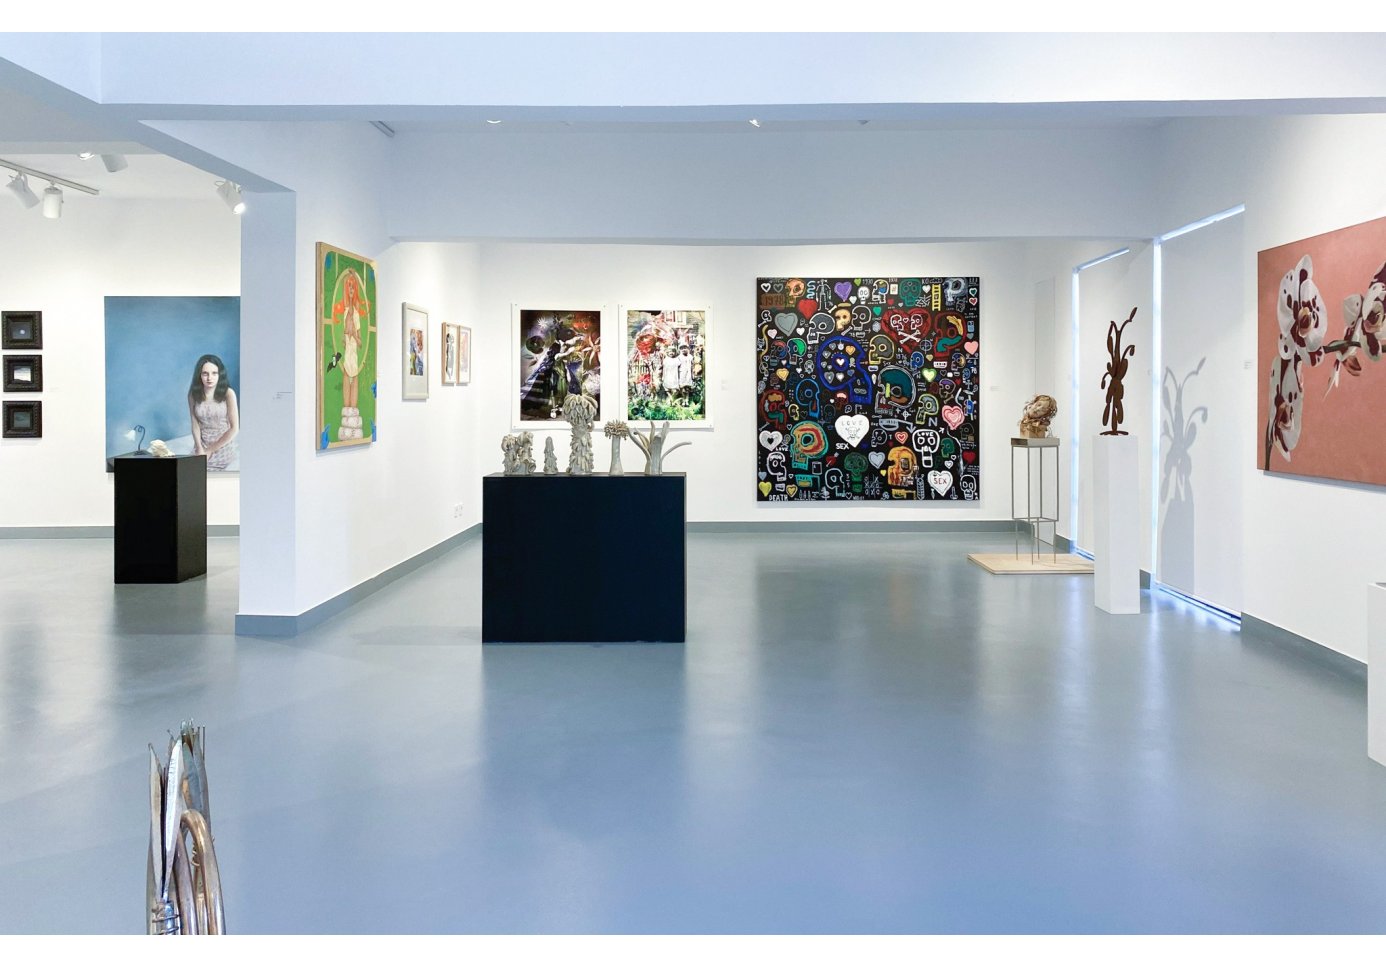 a view of the gallery's inside, artworks around.